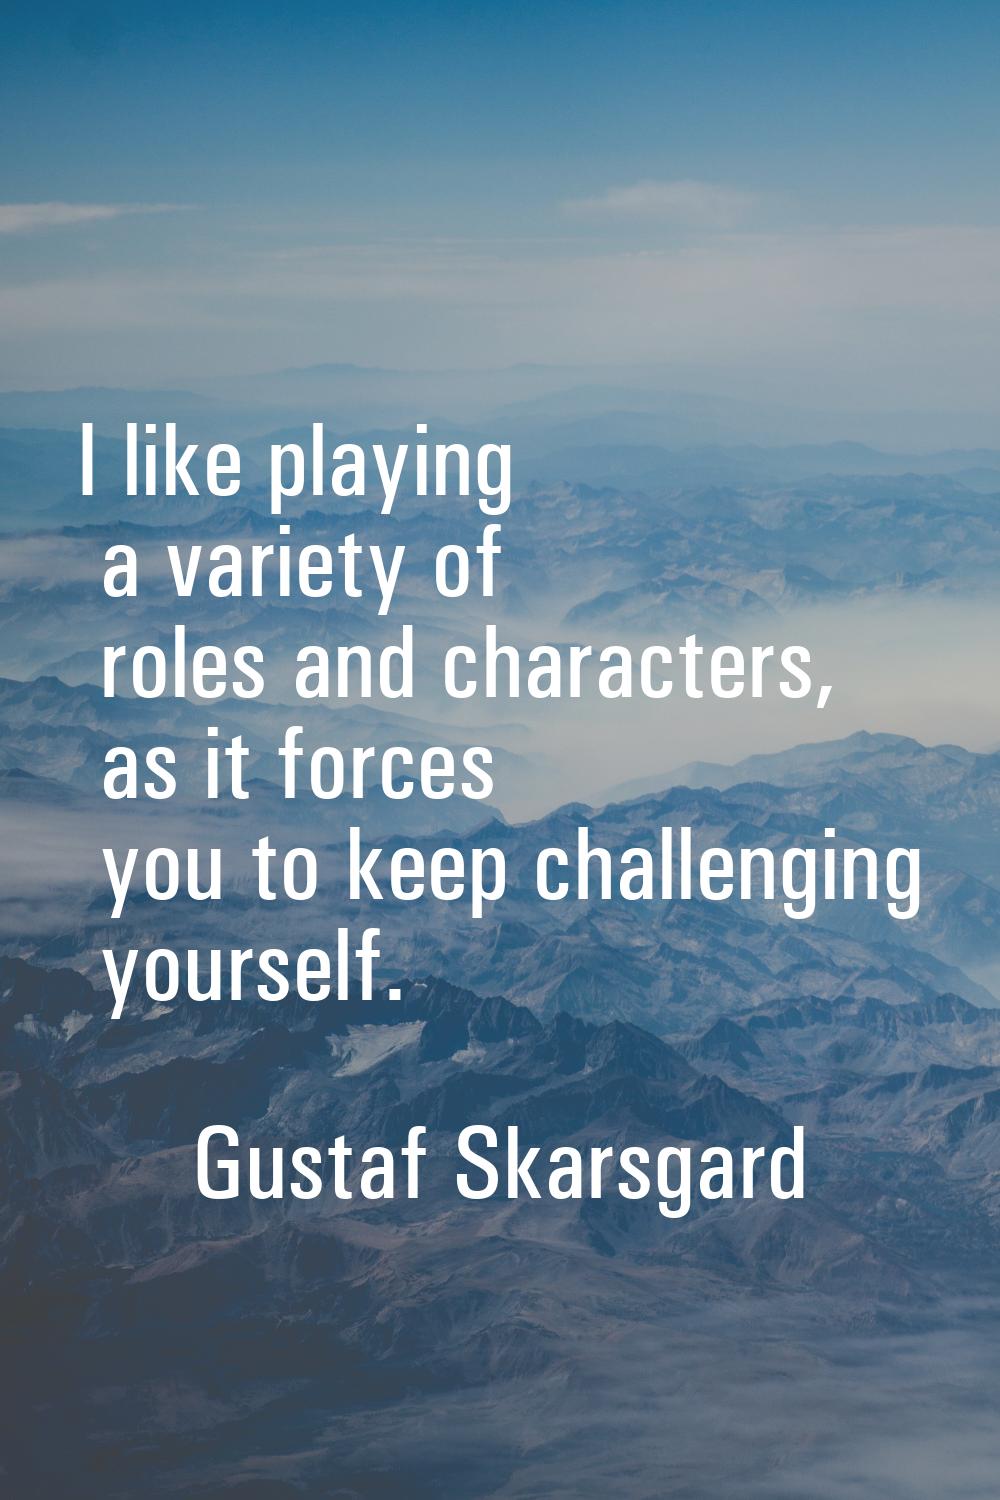 I like playing a variety of roles and characters, as it forces you to keep challenging yourself.